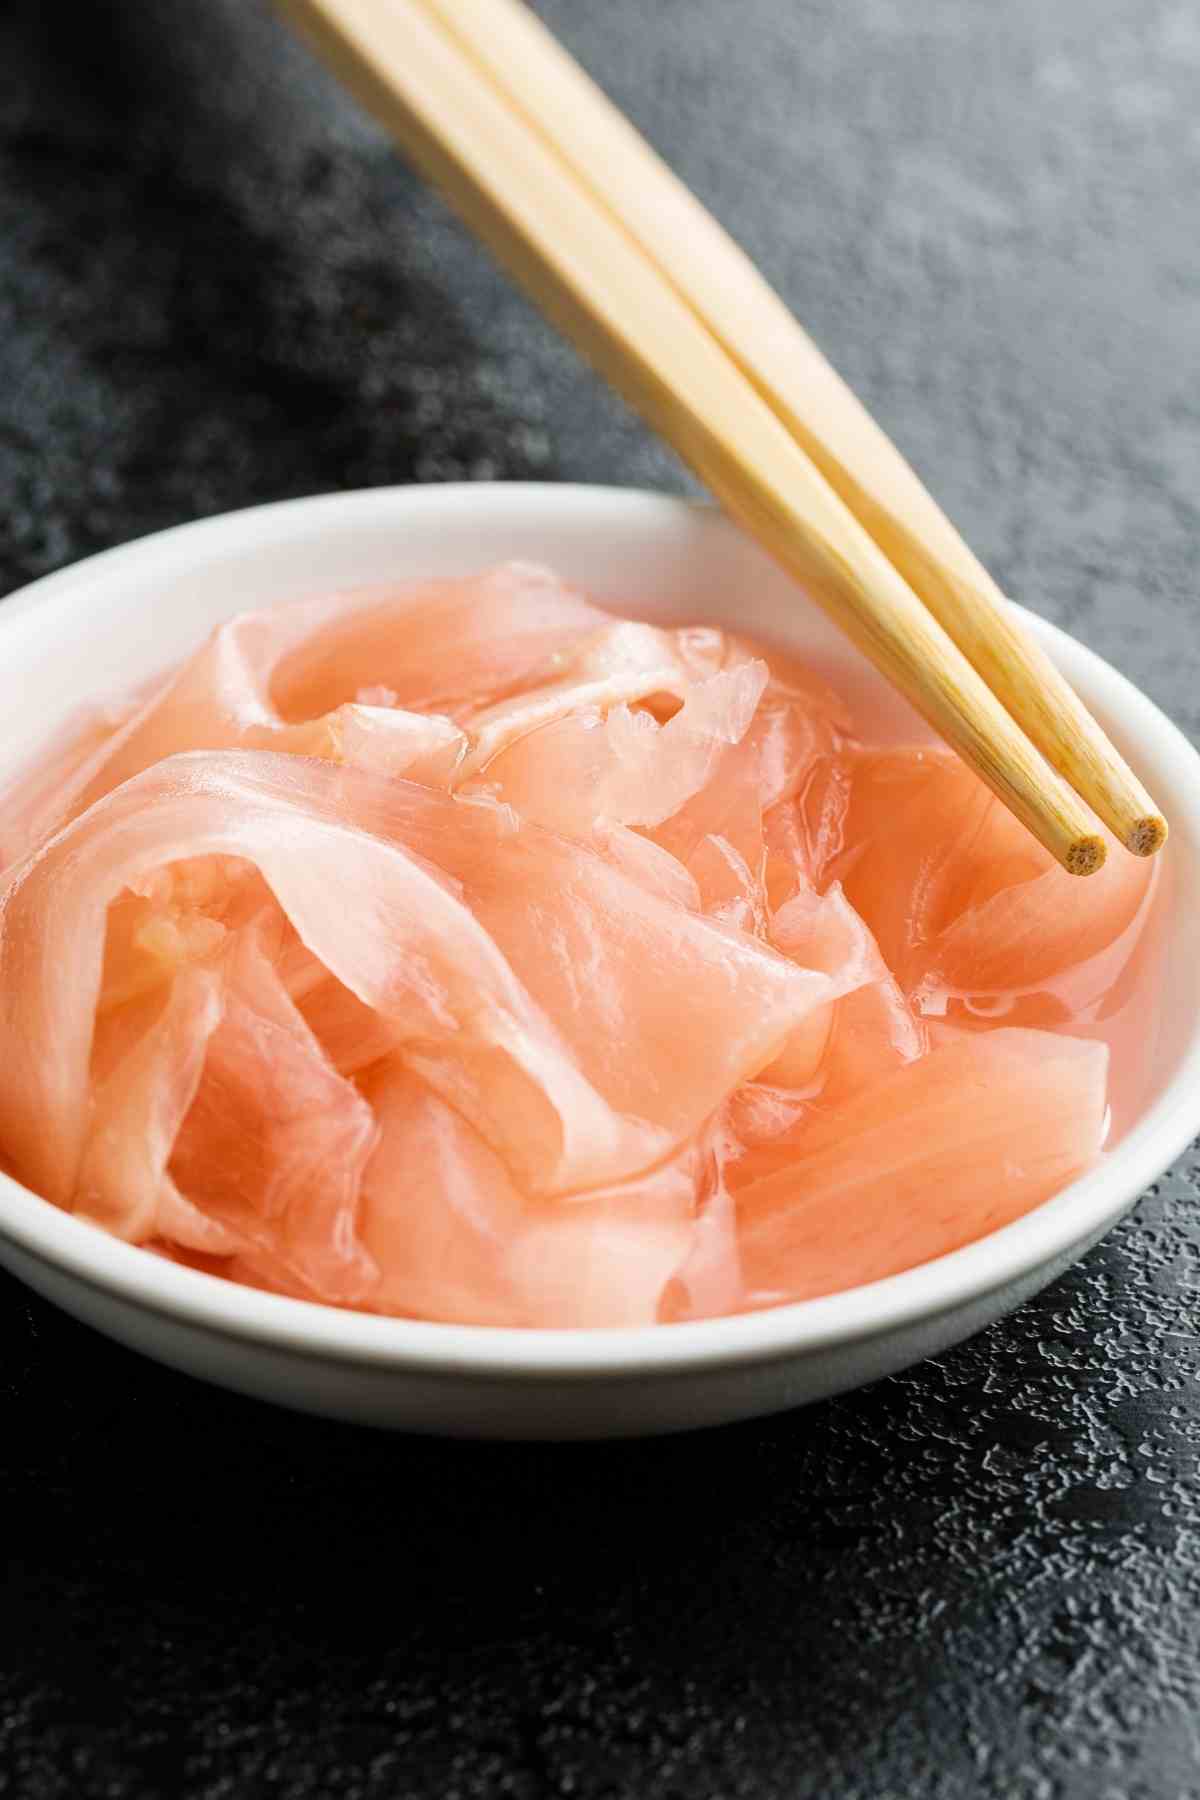 If you love sushi, you'll be familiar with the soft pink pickled ginger that accompanies your delicious platter of seafood and rice - but how is it made?